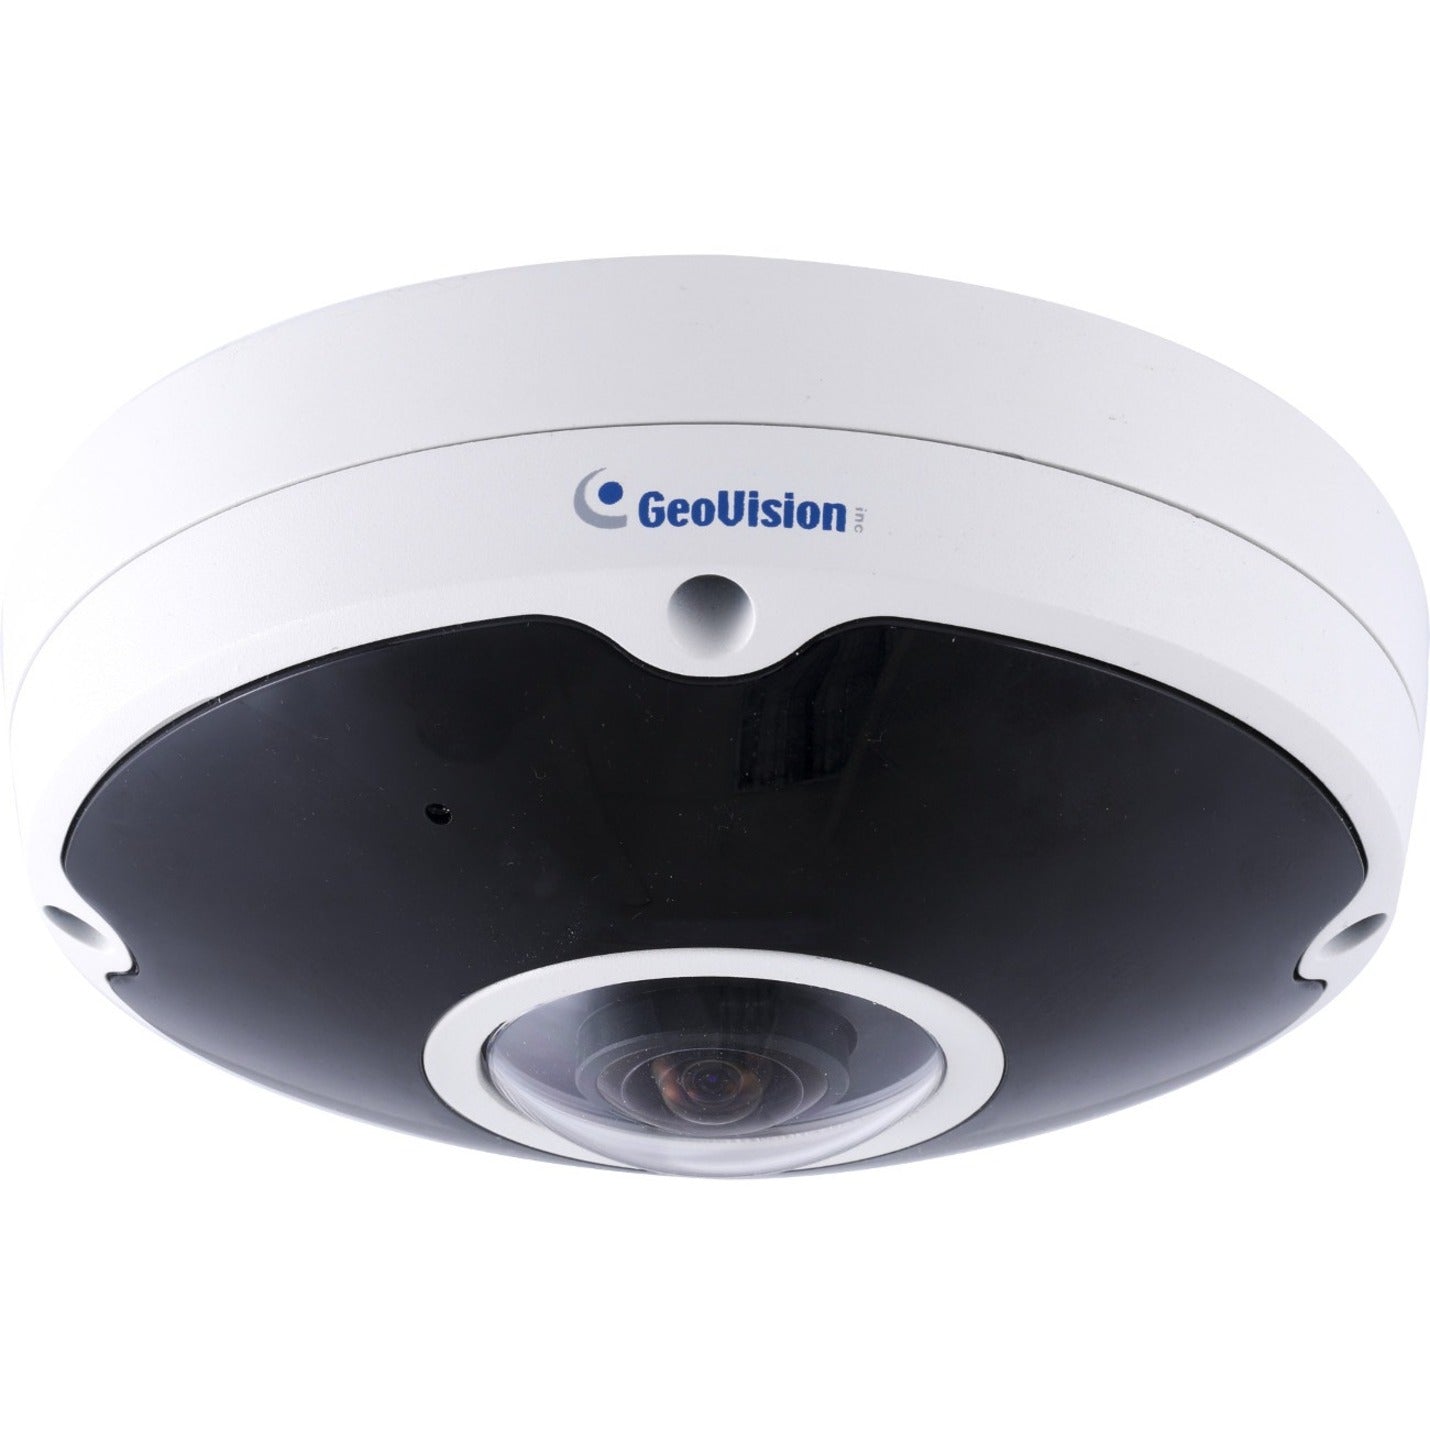 GeoVision GV-FER12700 12MP H.265 Low Lux WDR IR Fisheye Rugged IP Camera, Outdoor, 4000 x 3000 Resolution, 1.20mm Fixed Lens